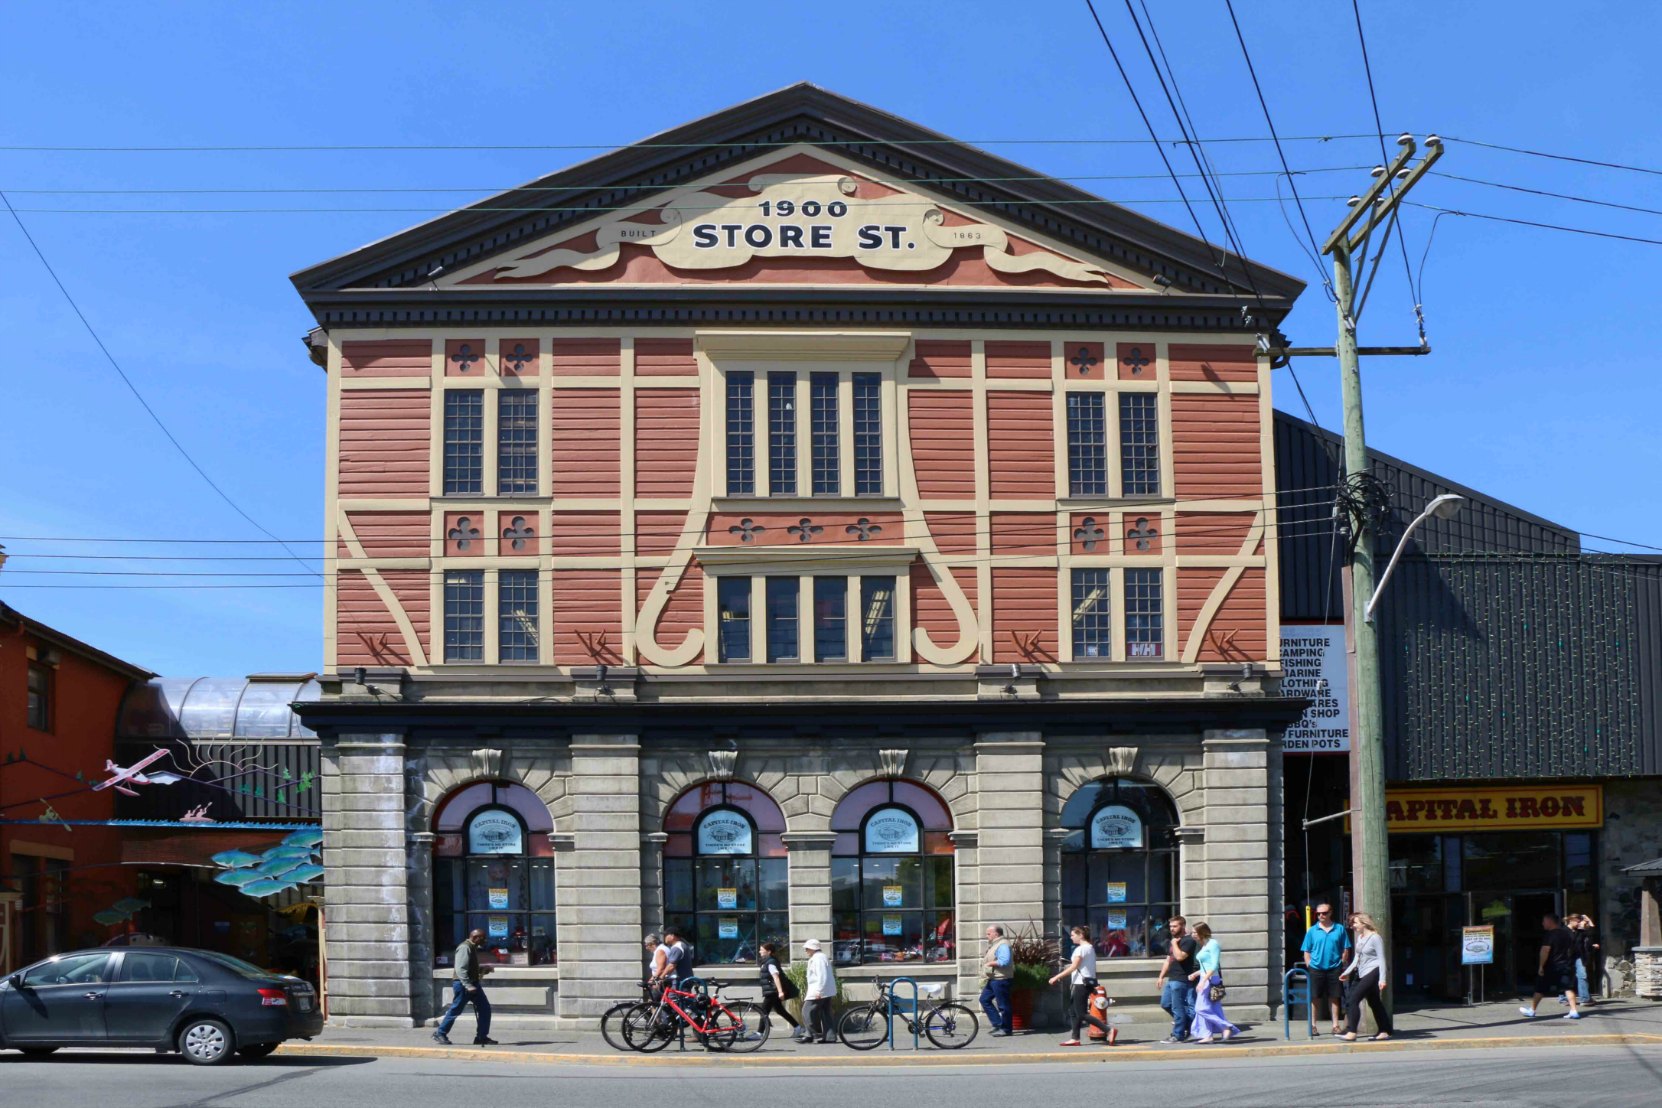 Capital Iron at 1900 Store Street. the building was originally built in 1862 for Dickson, Campbell & Company, commission merchants. 1824 Store Street (left), built in 1890, and 1900 Store Street (right), built in 1862. (photo by Victoria Online Sightseeing Tours)